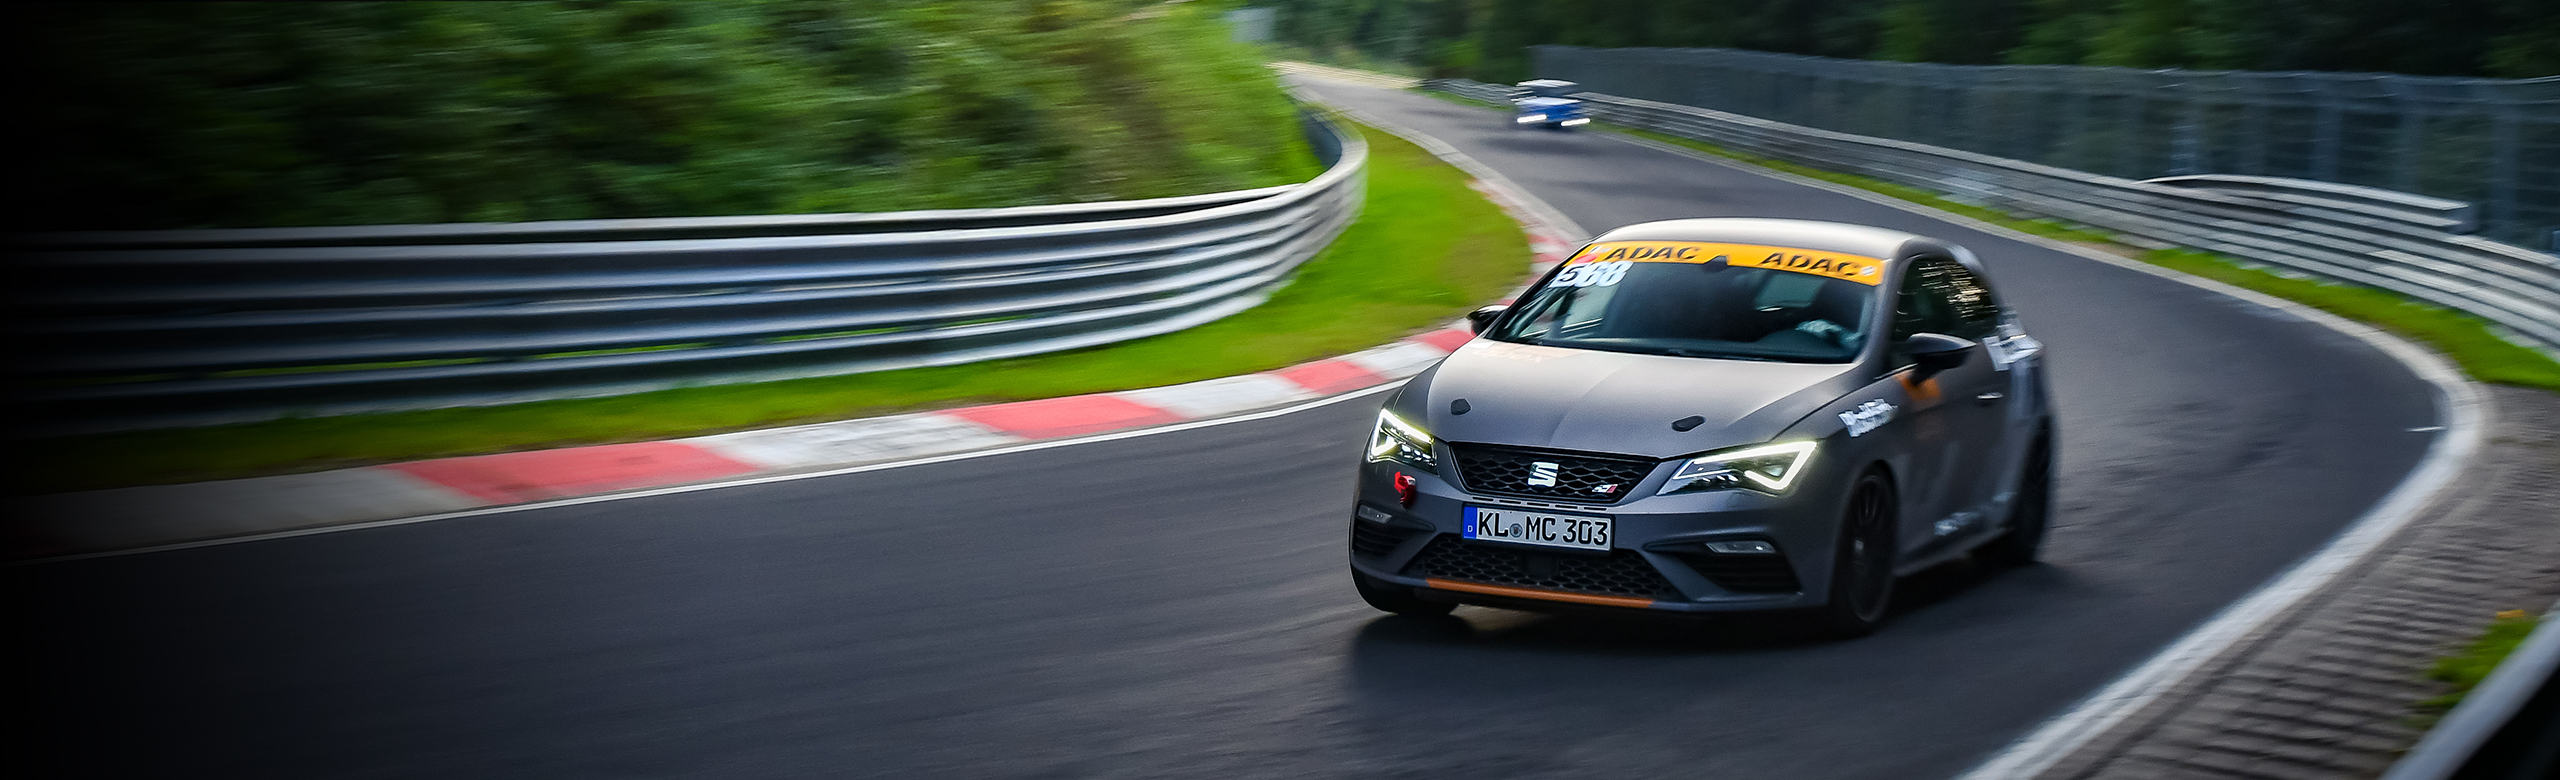 With the Nürburgring Taxi you can have the lap of a lifetime